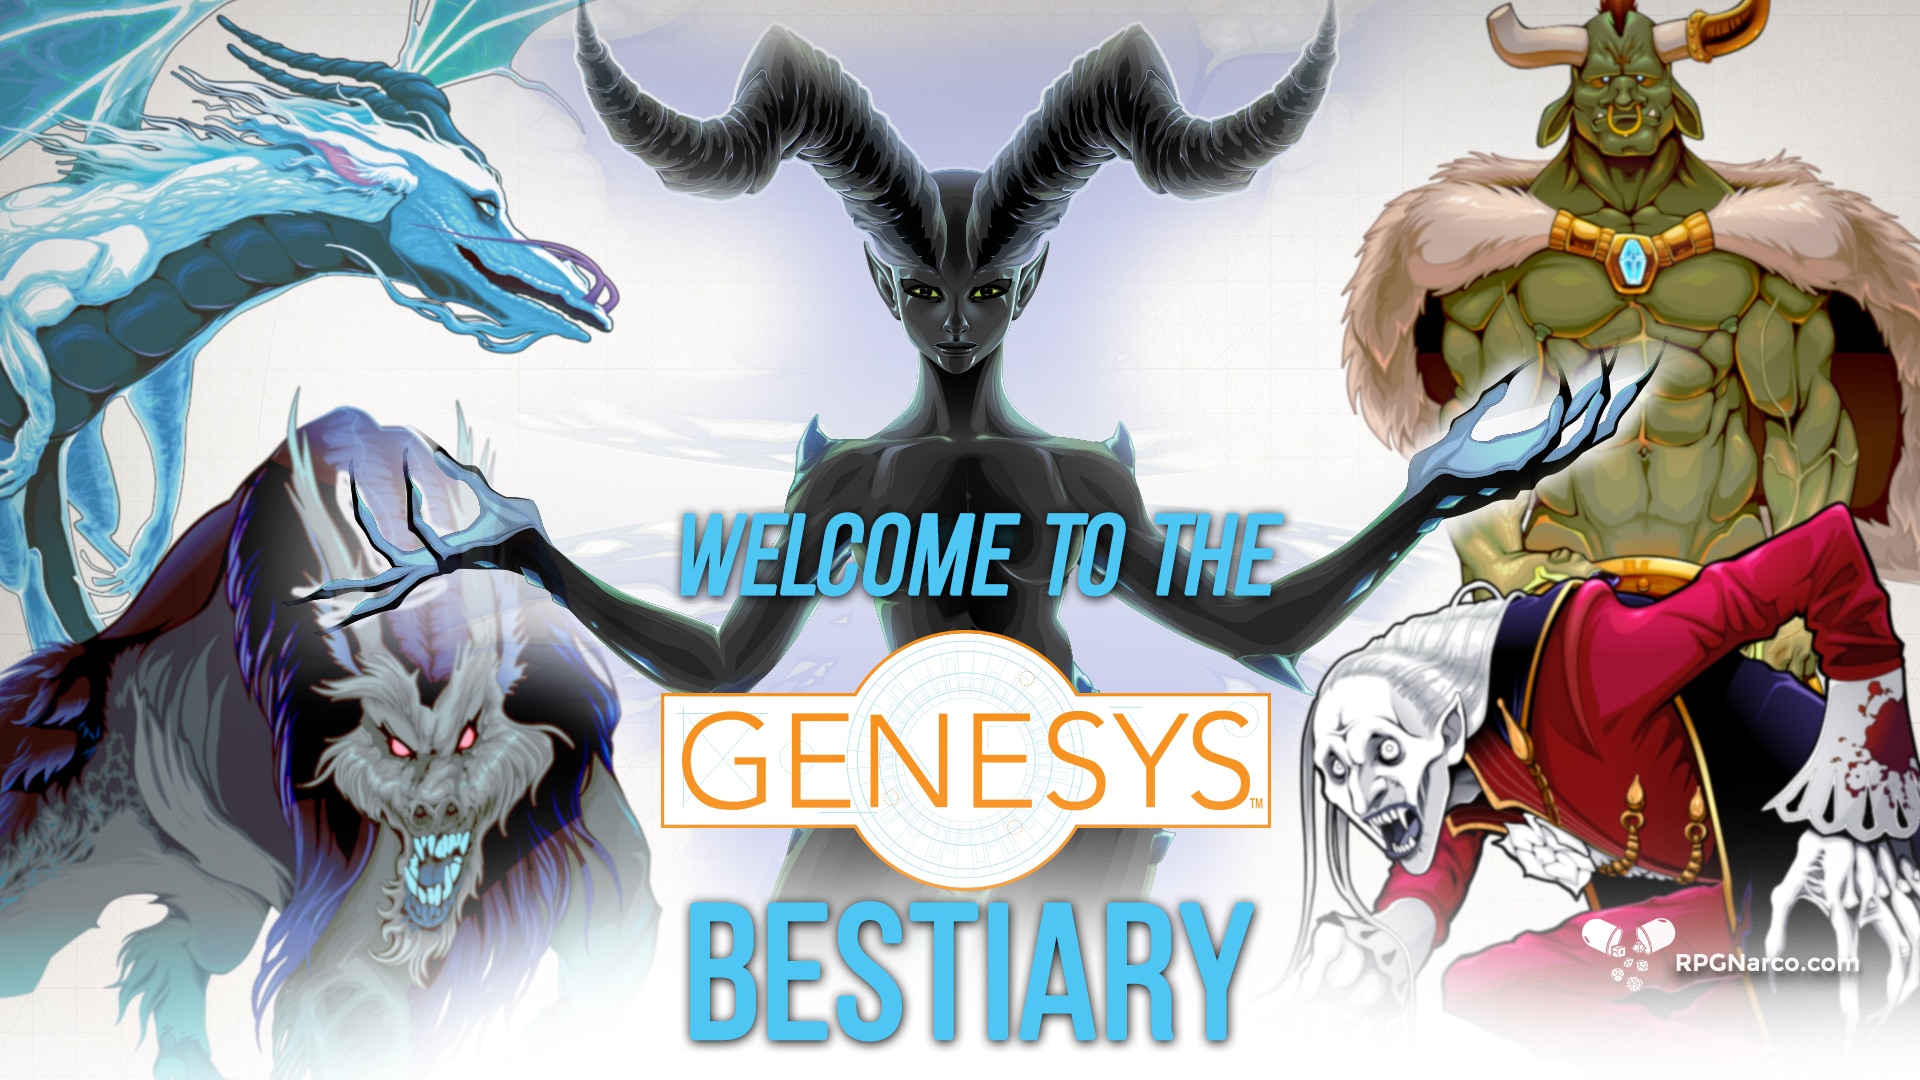 Announcing the Genesys Bestiary